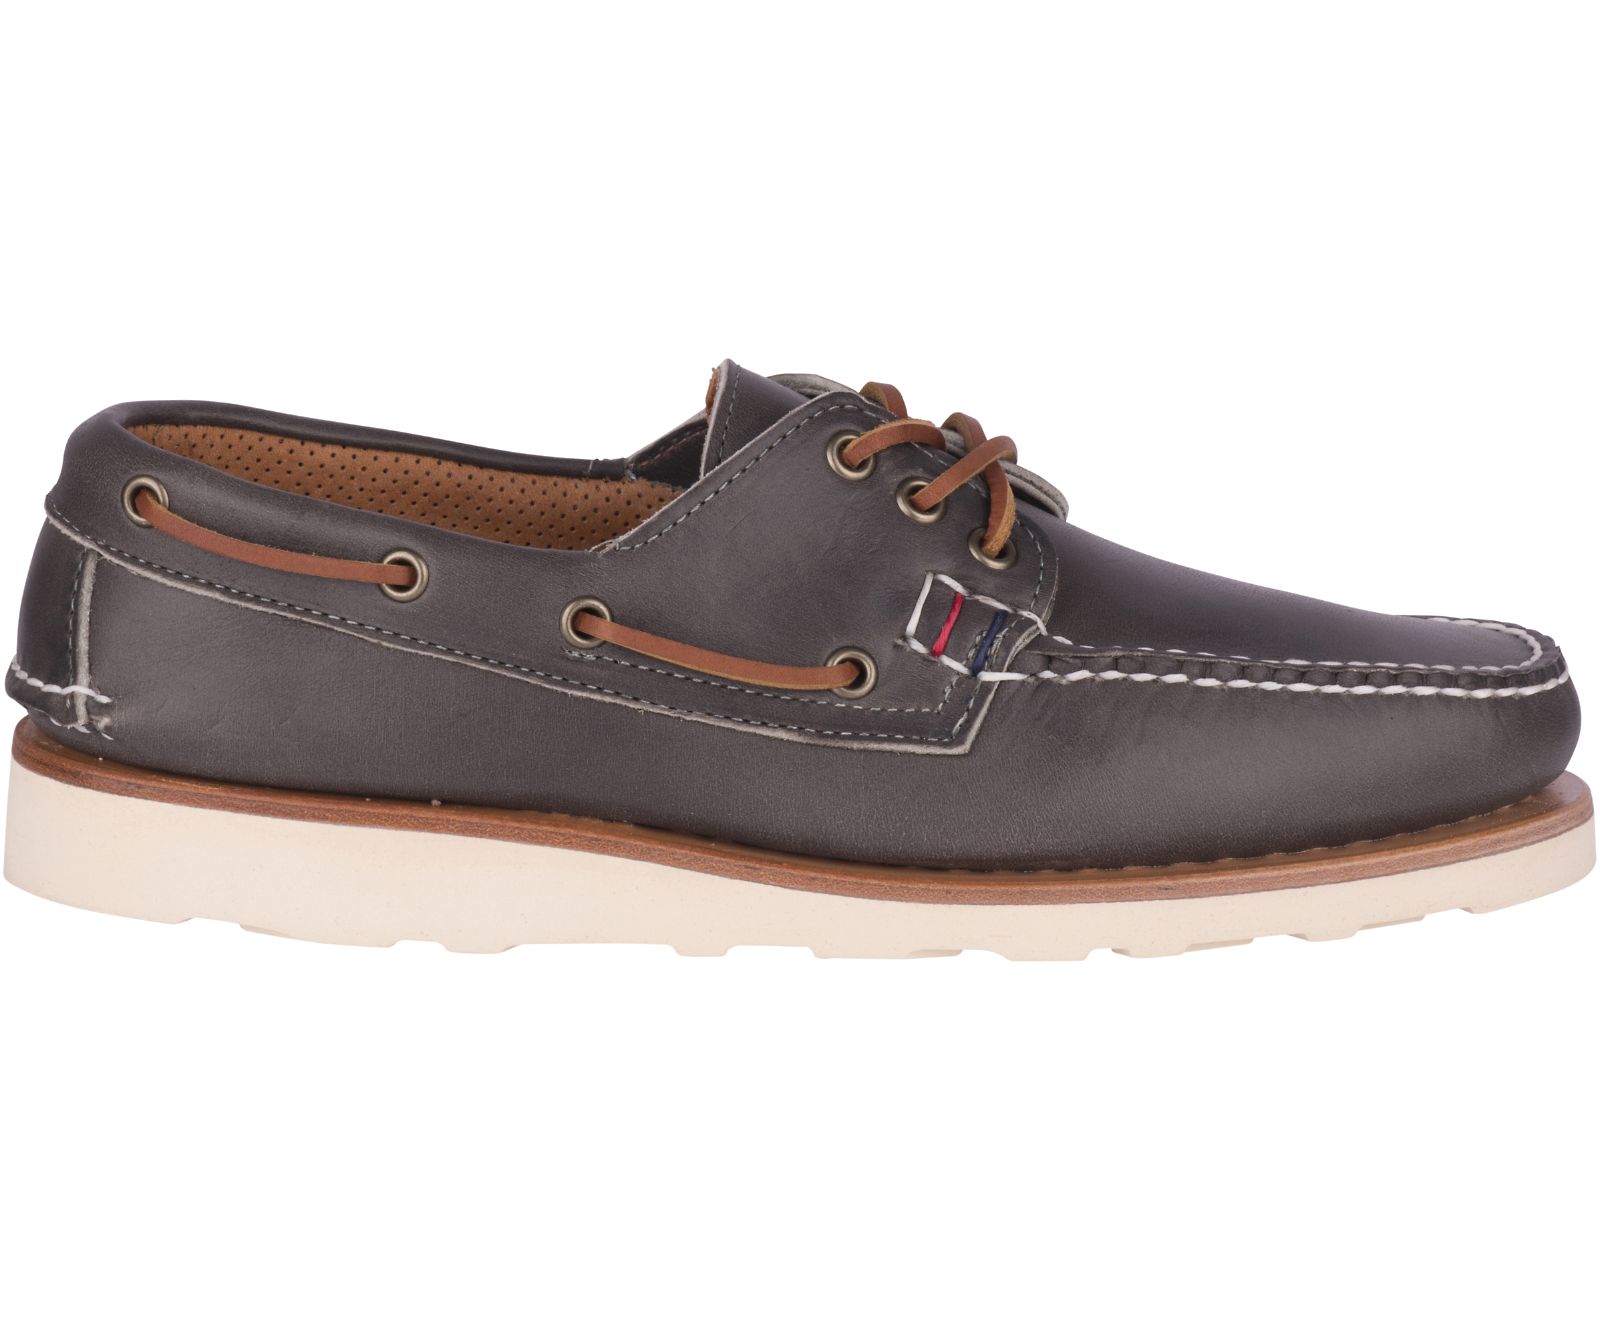 Men's Gold Cup Handcrafted in Maine 3-Eye Boat Shoe - Grey